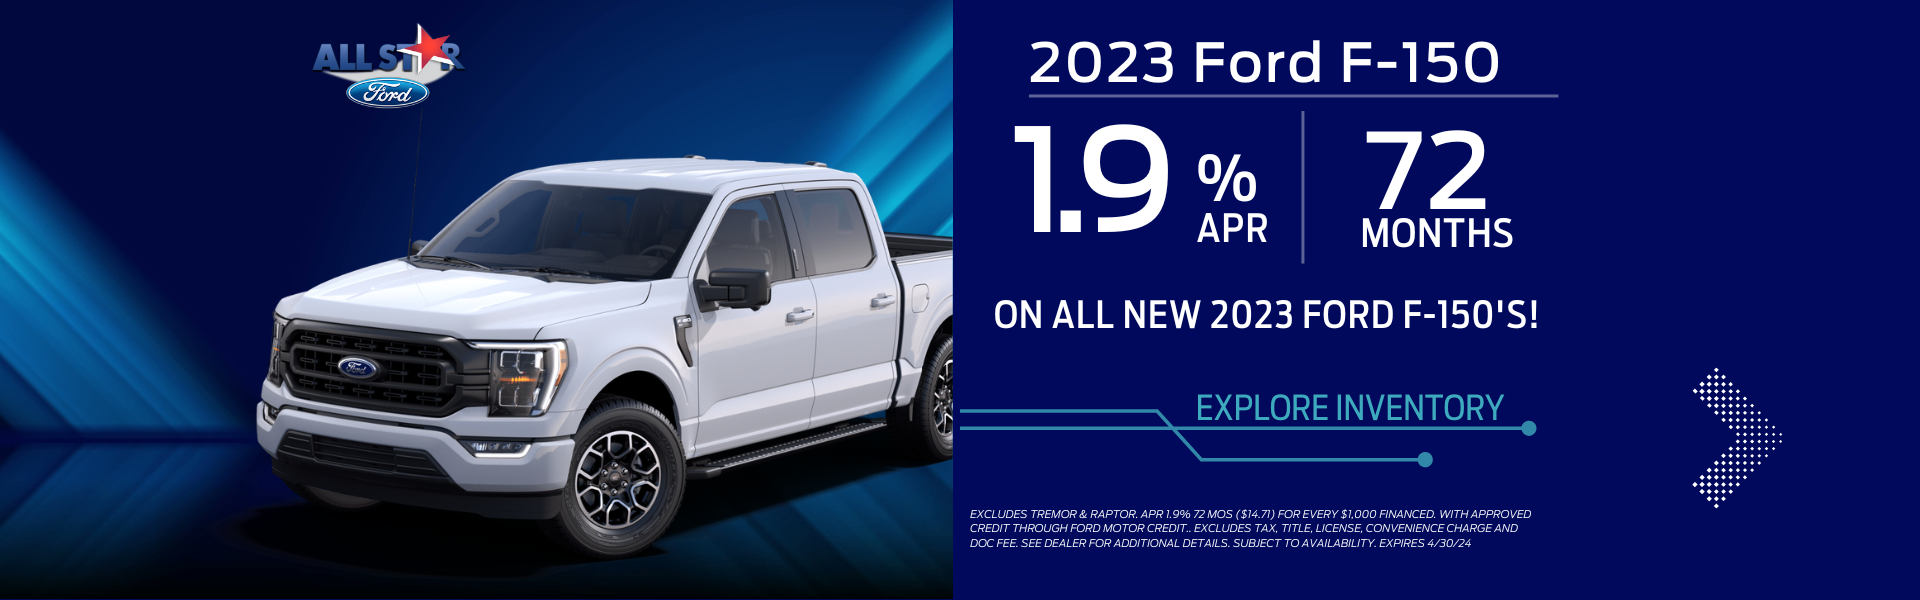 Ford F-150 Offers